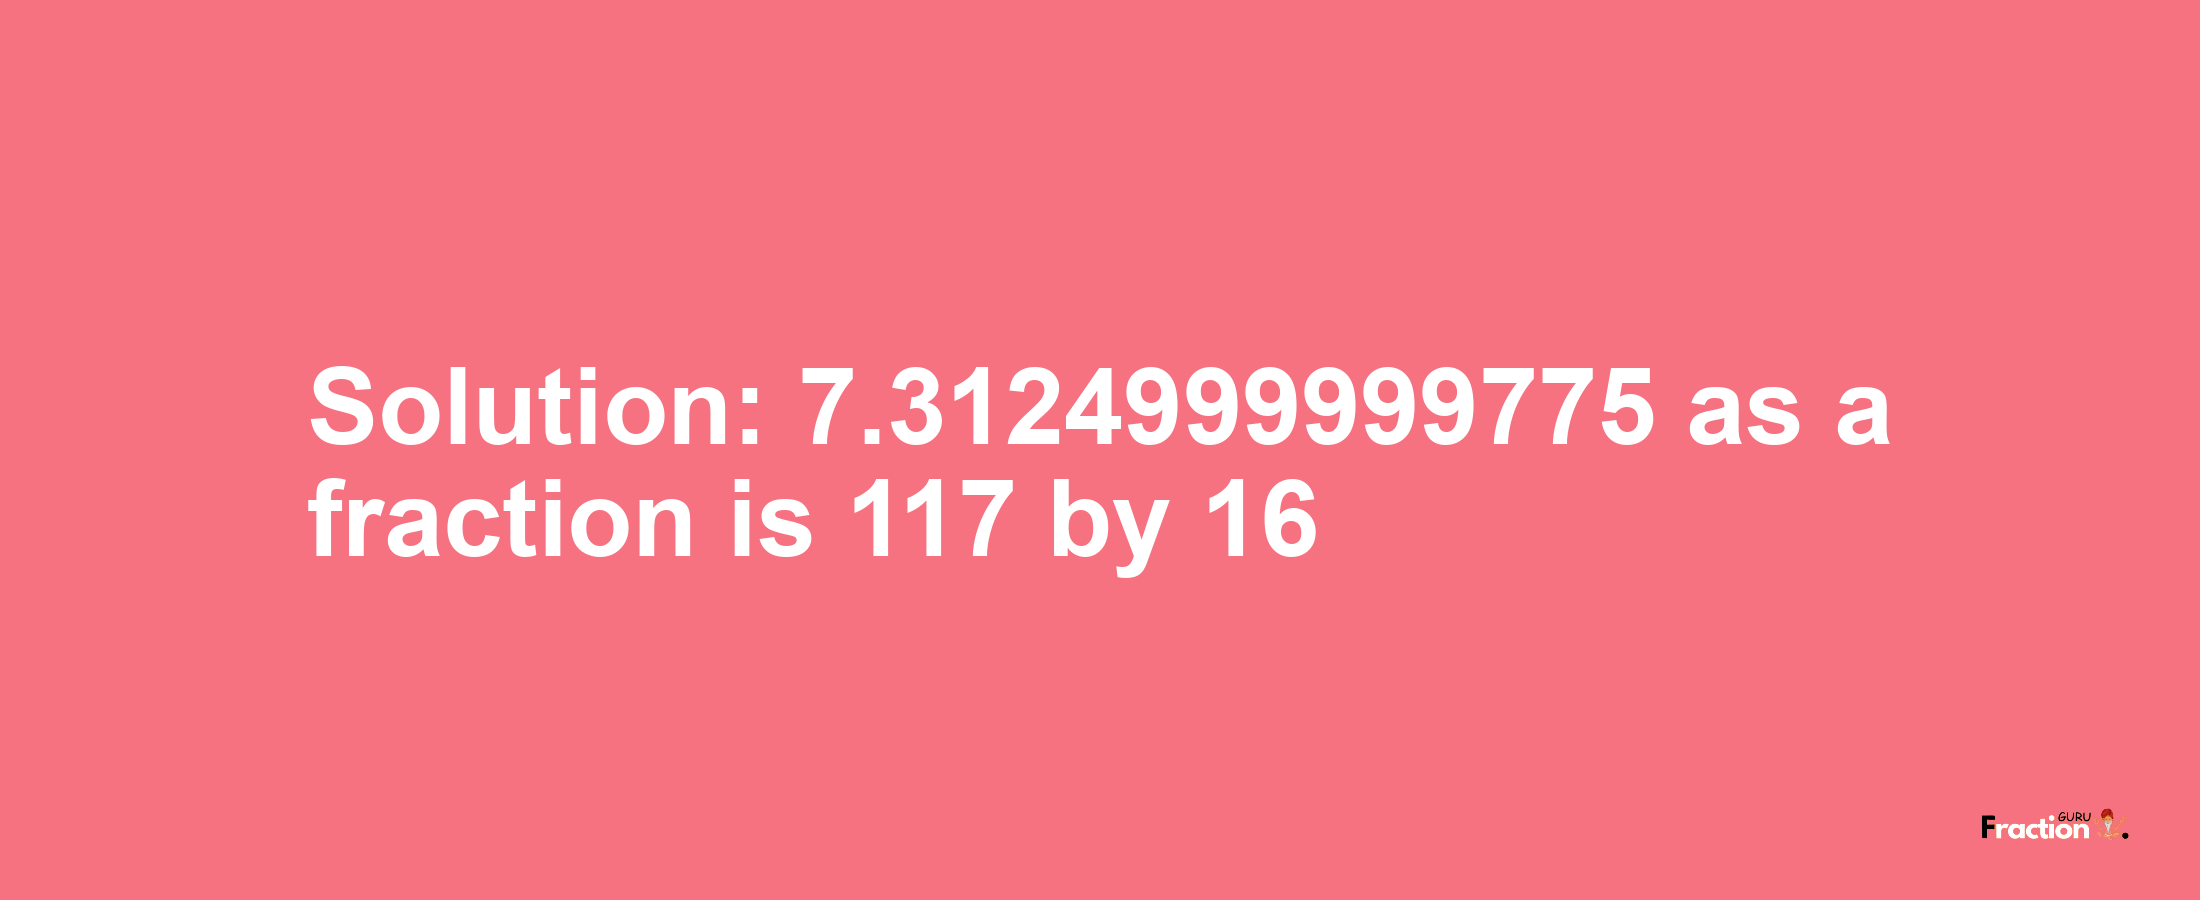 Solution:7.3124999999775 as a fraction is 117/16